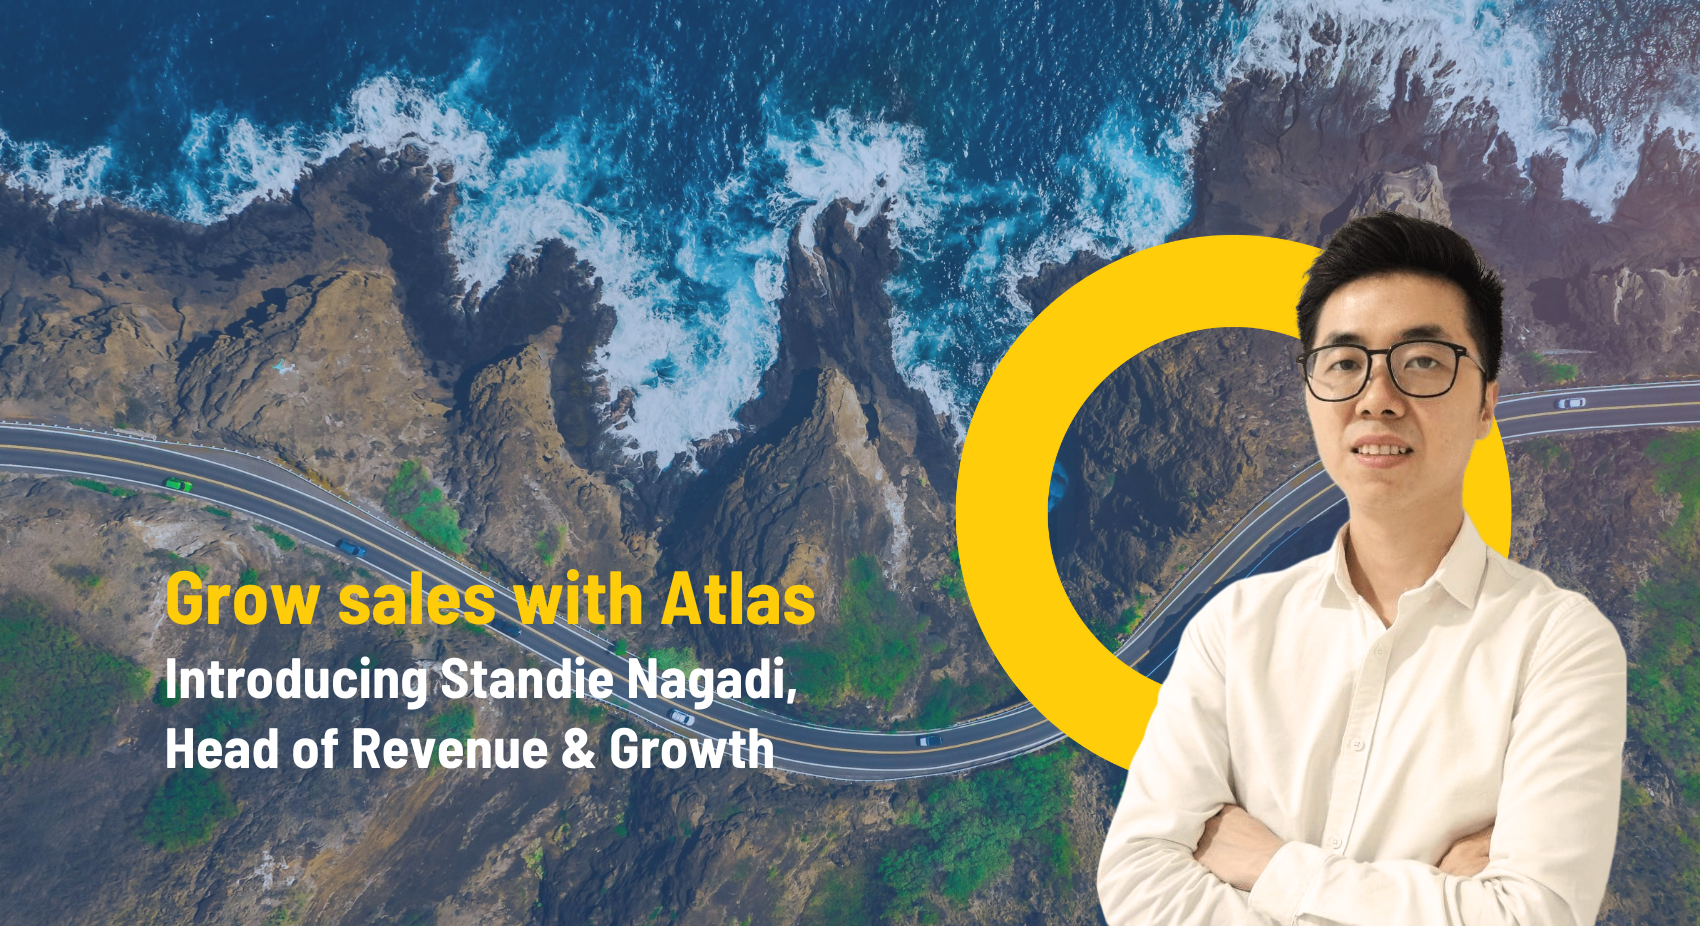 Grow sales with Atlas: Introducing Standie Nagadi, Head of Revenue and Growth